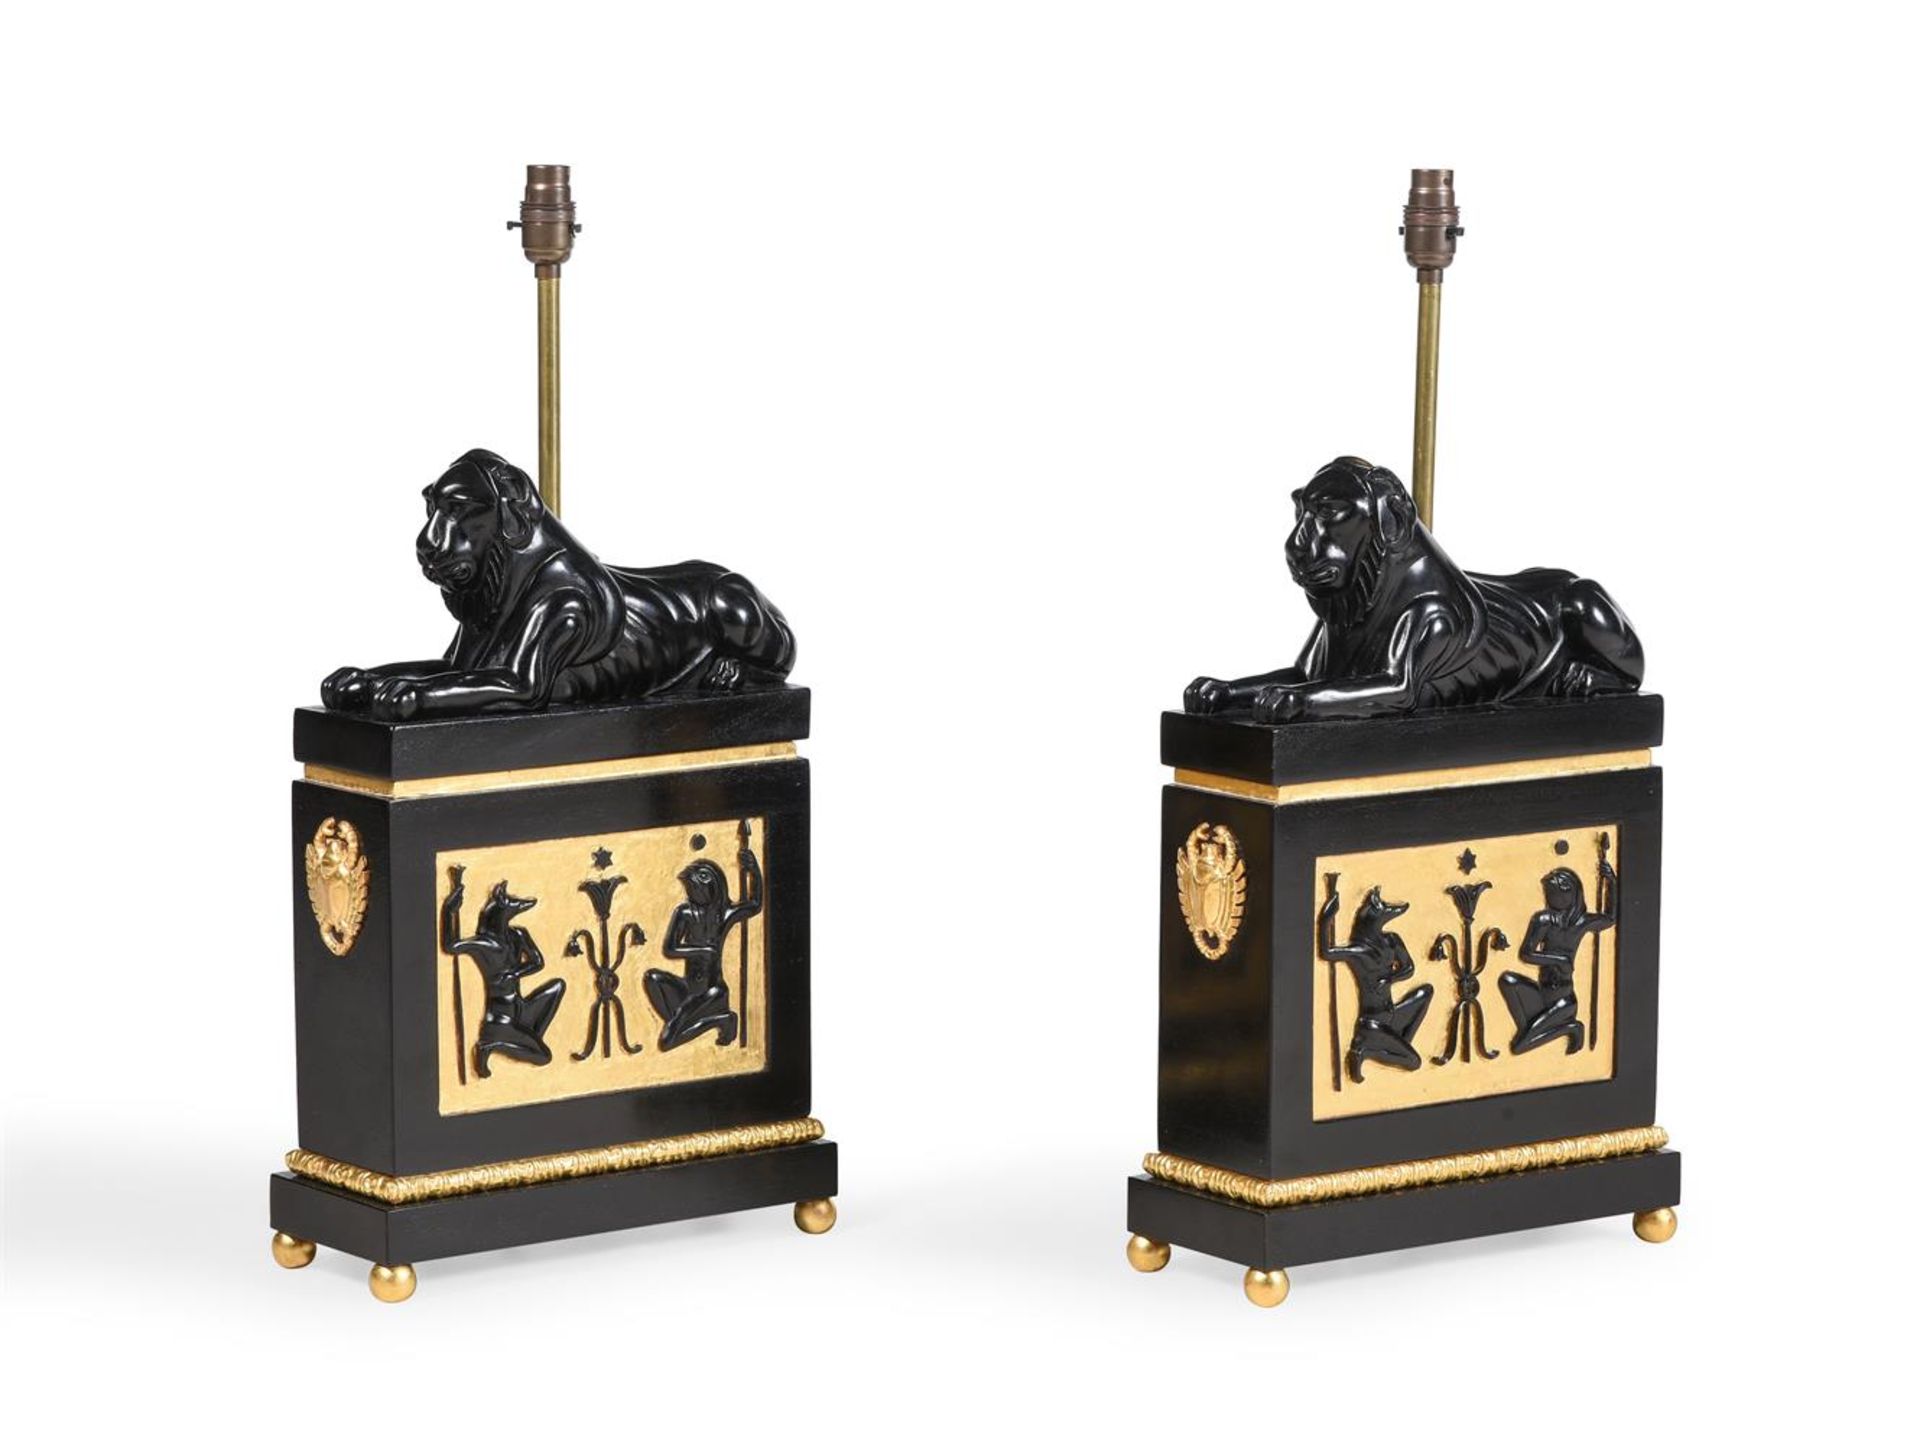 A PAIR OF EBONISED AND GILDED LAMPS, AFTER A DESIGN BY THOMAS HOPE, OF RECENT MANUFACTURE